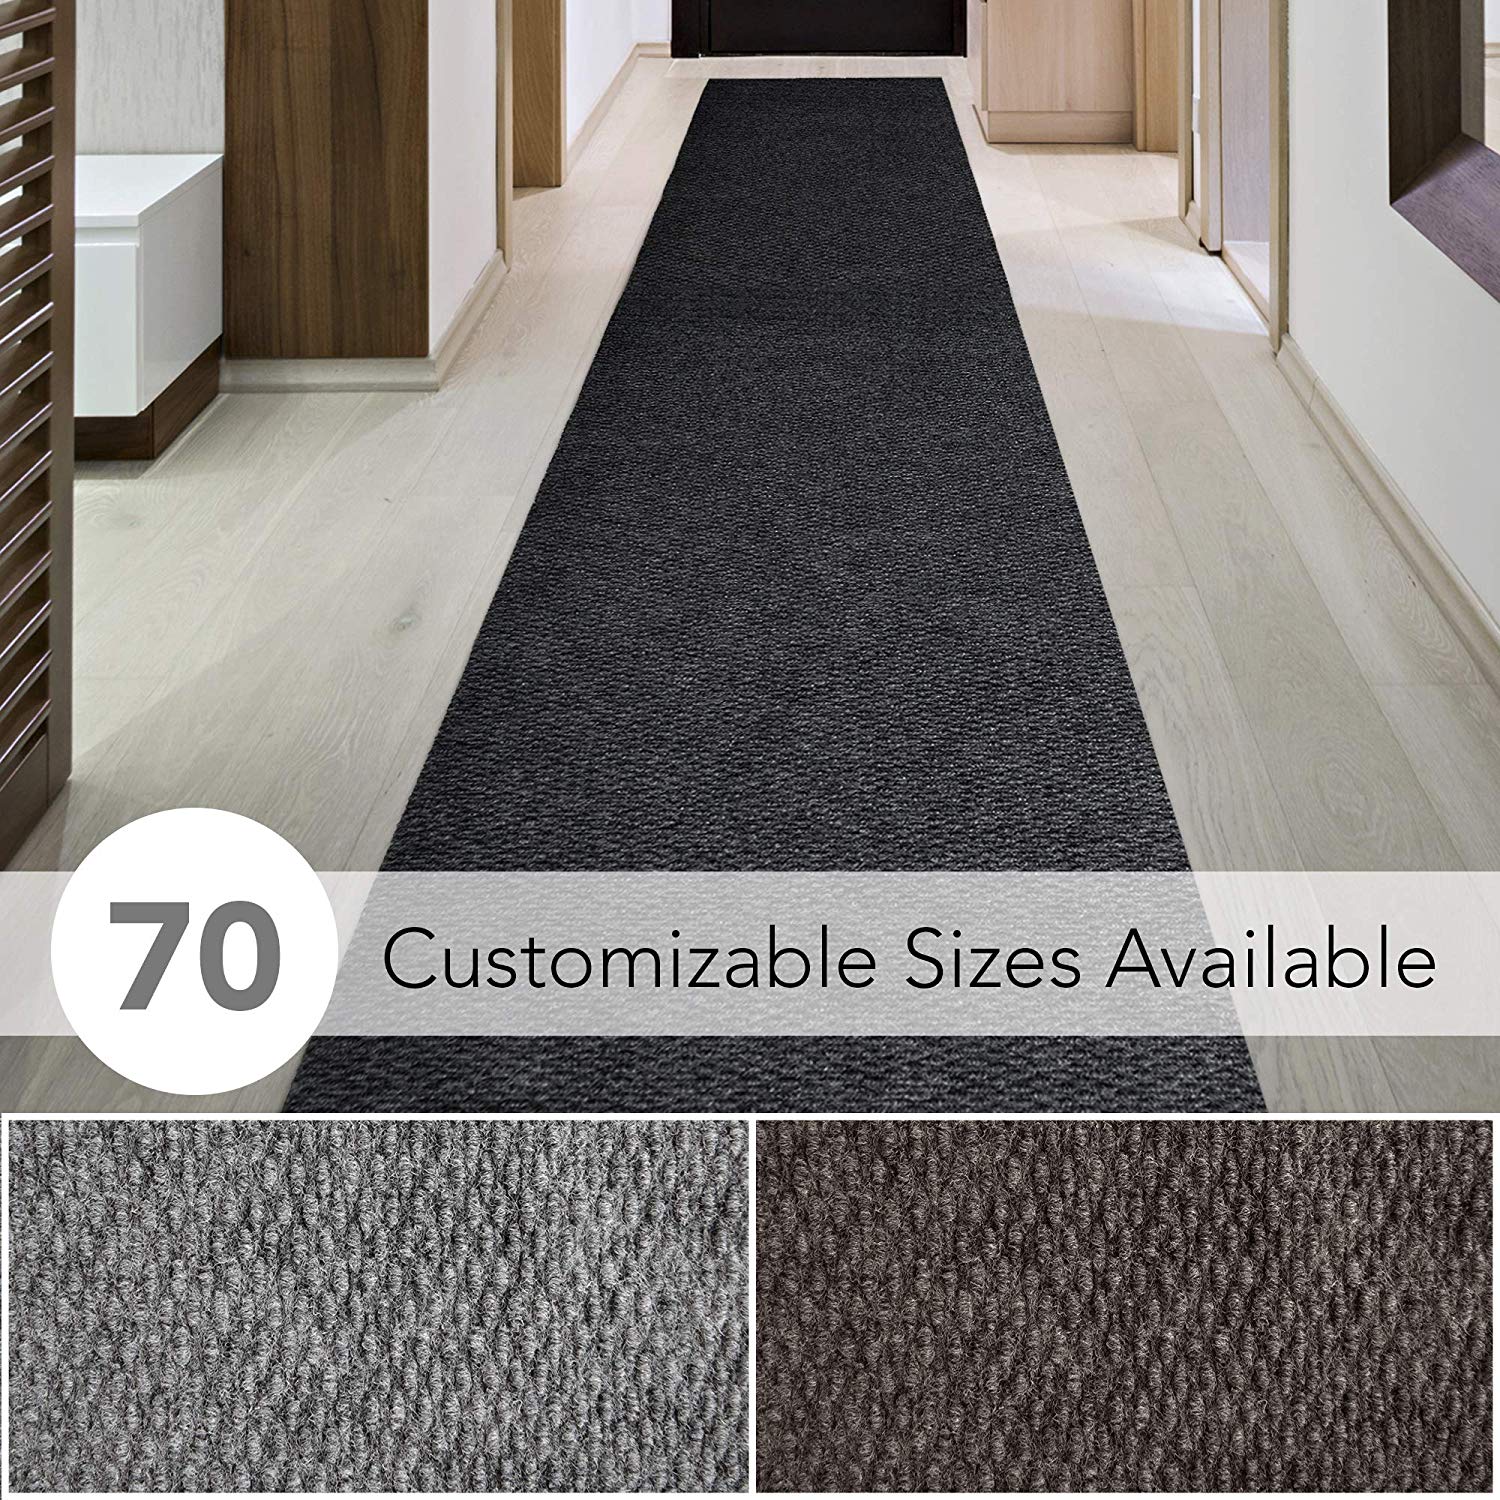 Carpet for Hallway Kitchen Carpet Elephant Pictures Print Carpet Carpet Runner Busy Areas Red Carpet Runner for Event 70x24 Indoor Outdoor Carpet 